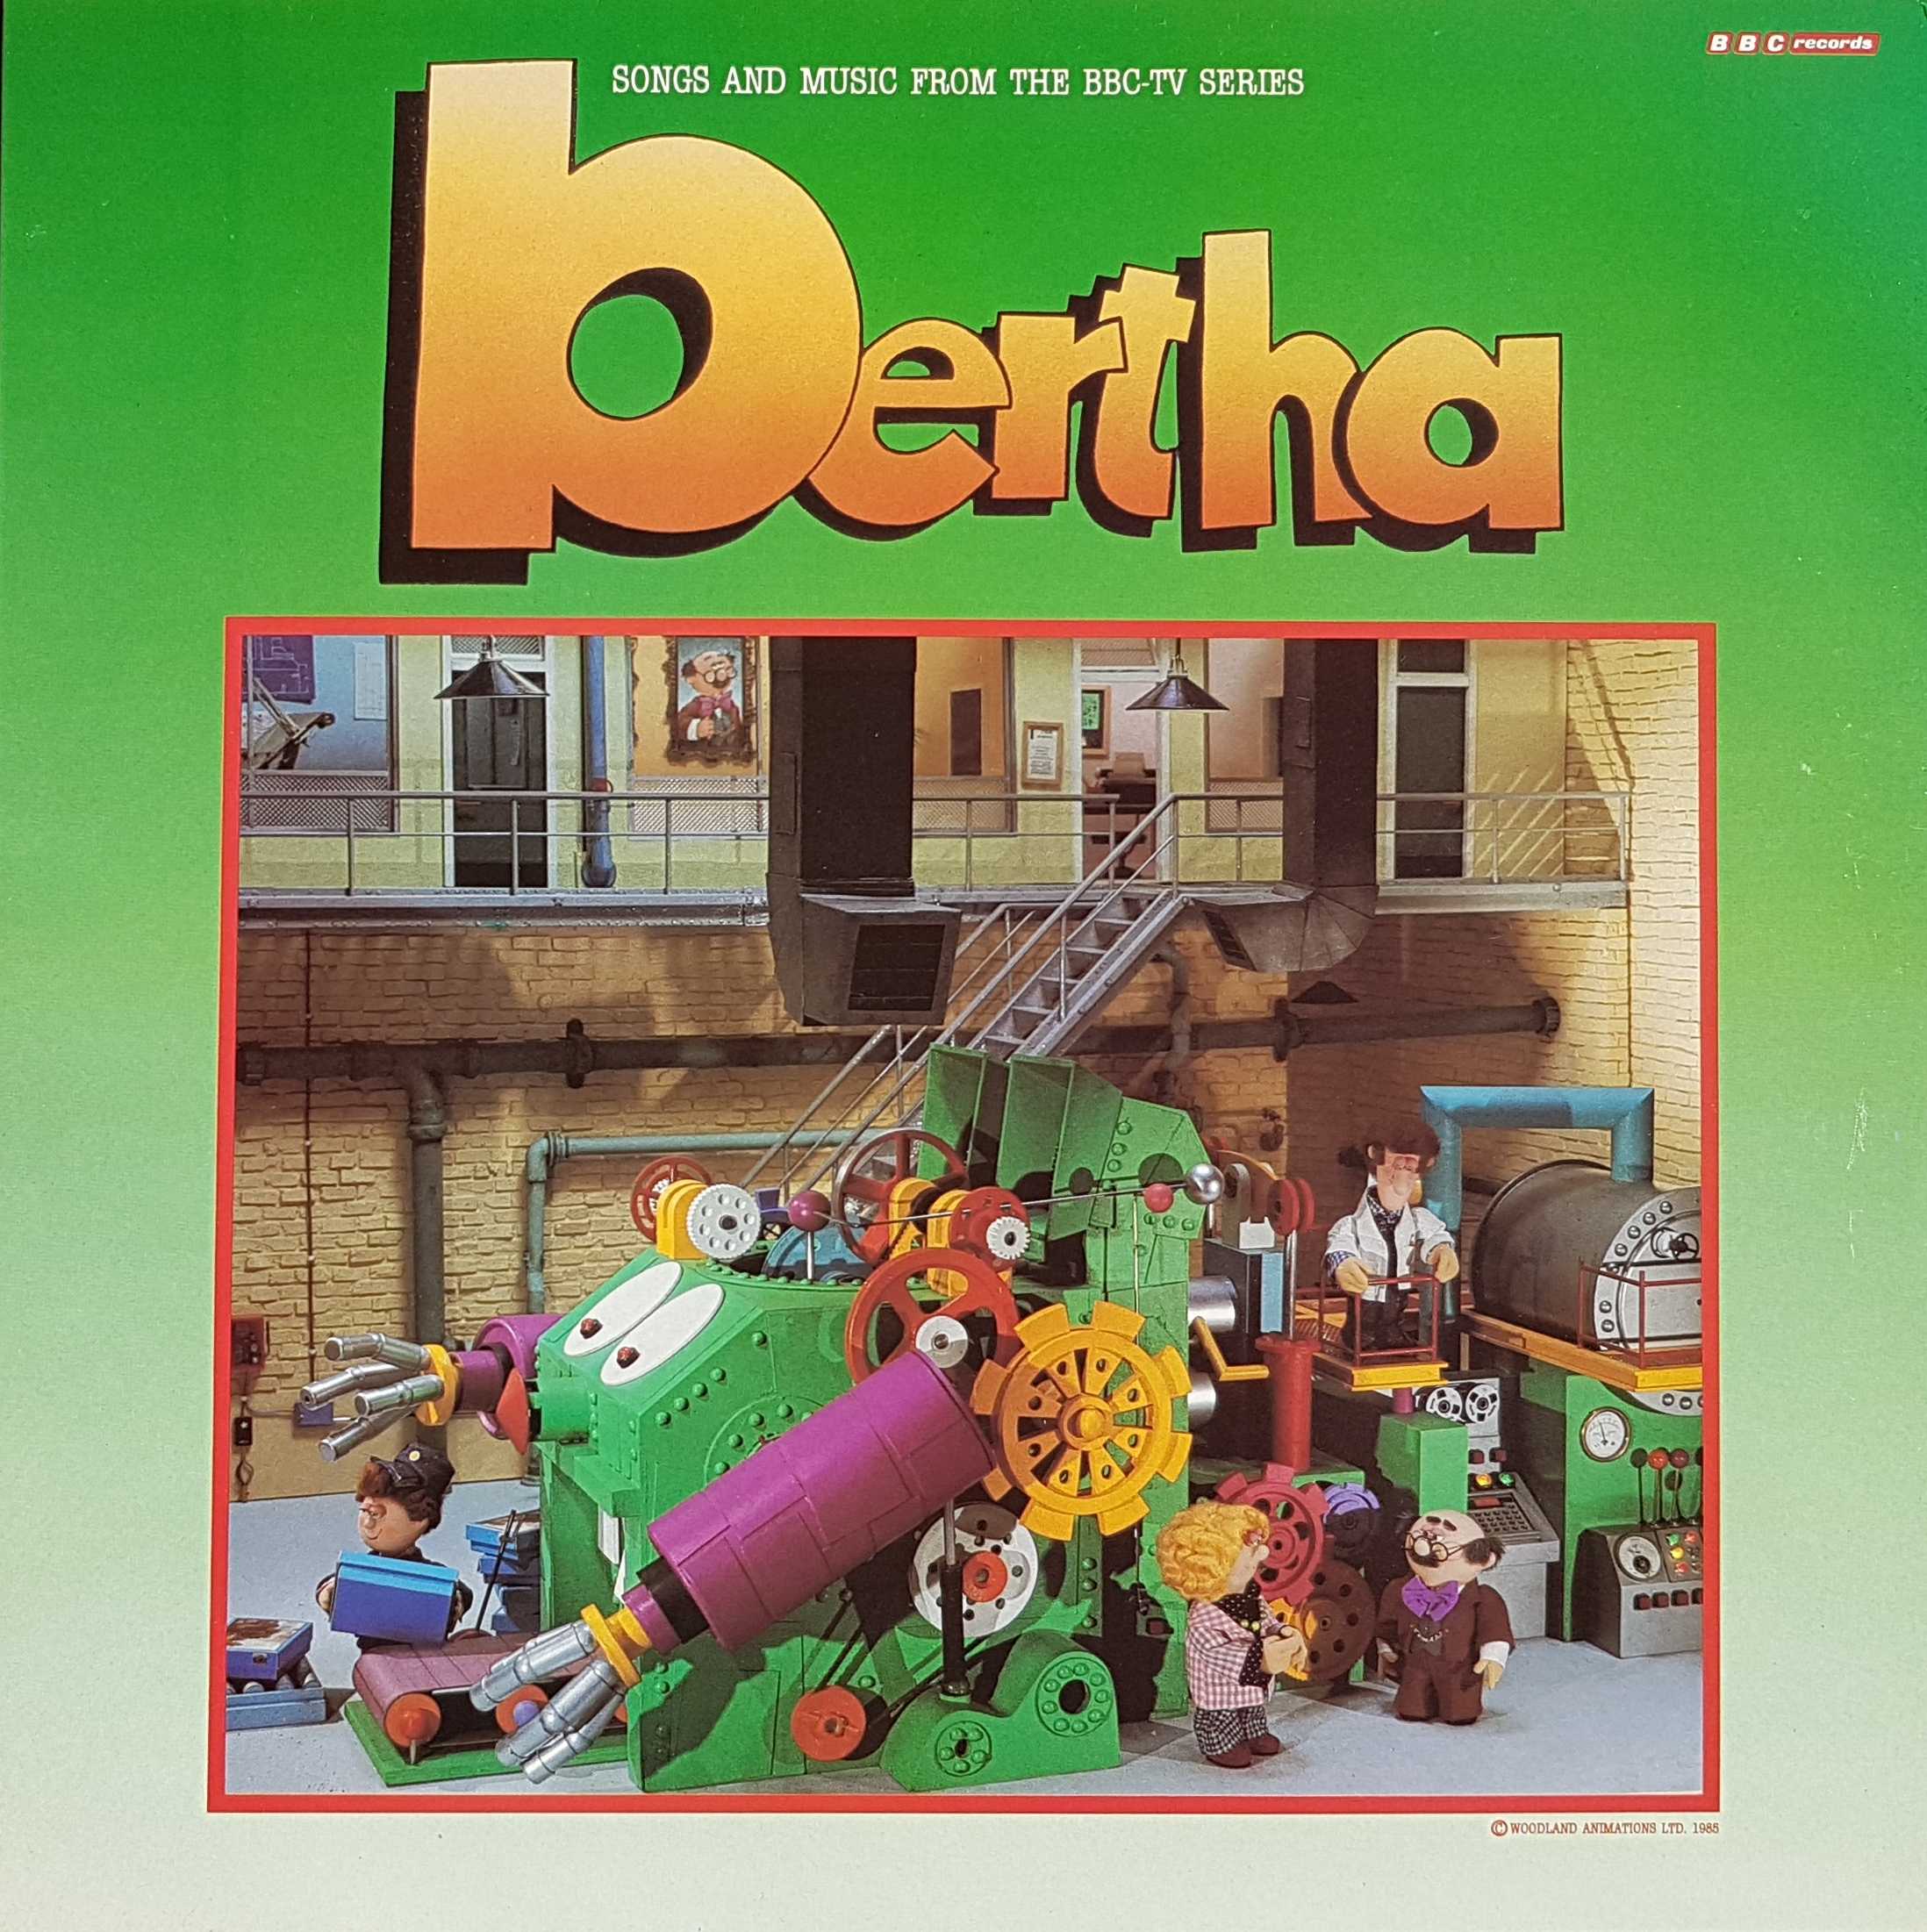 Picture of REH 585 Bertha by artist Bryan Daly from the BBC records and Tapes library